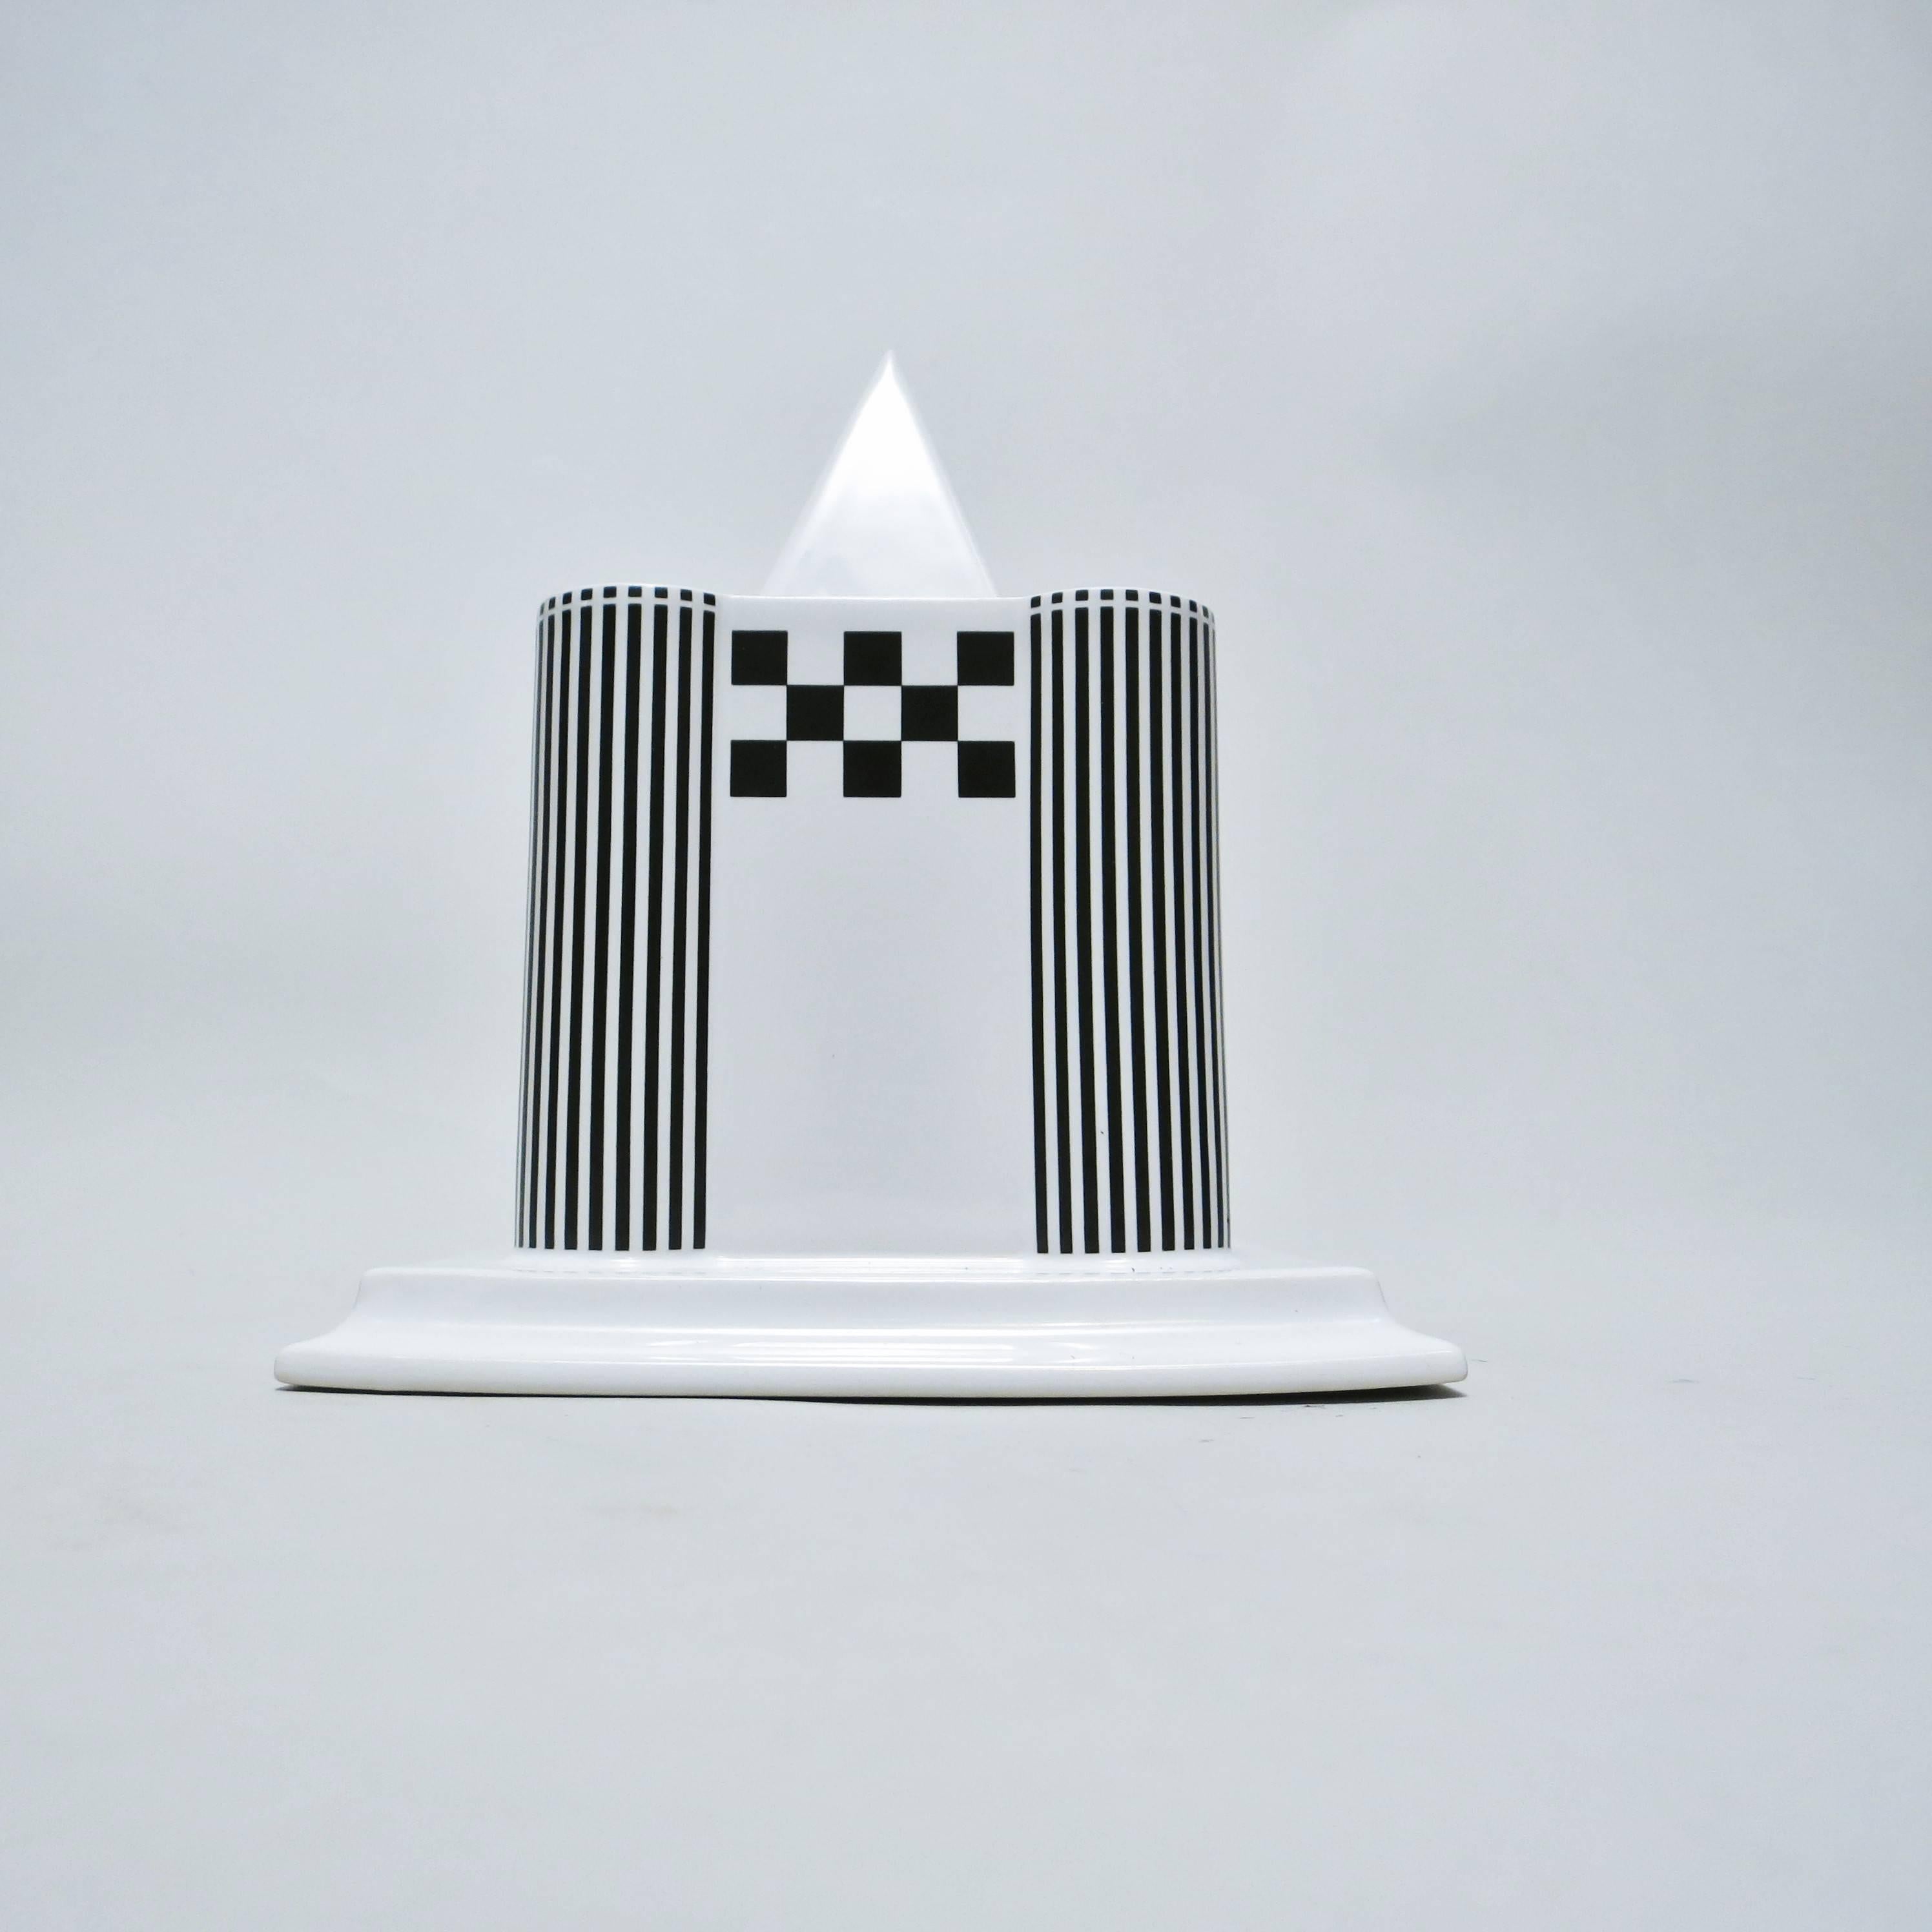 Post-modern candleholder or centerpiece "Temple" from the Vienna Collection designed by austria designer Heide Warlamis in 1985